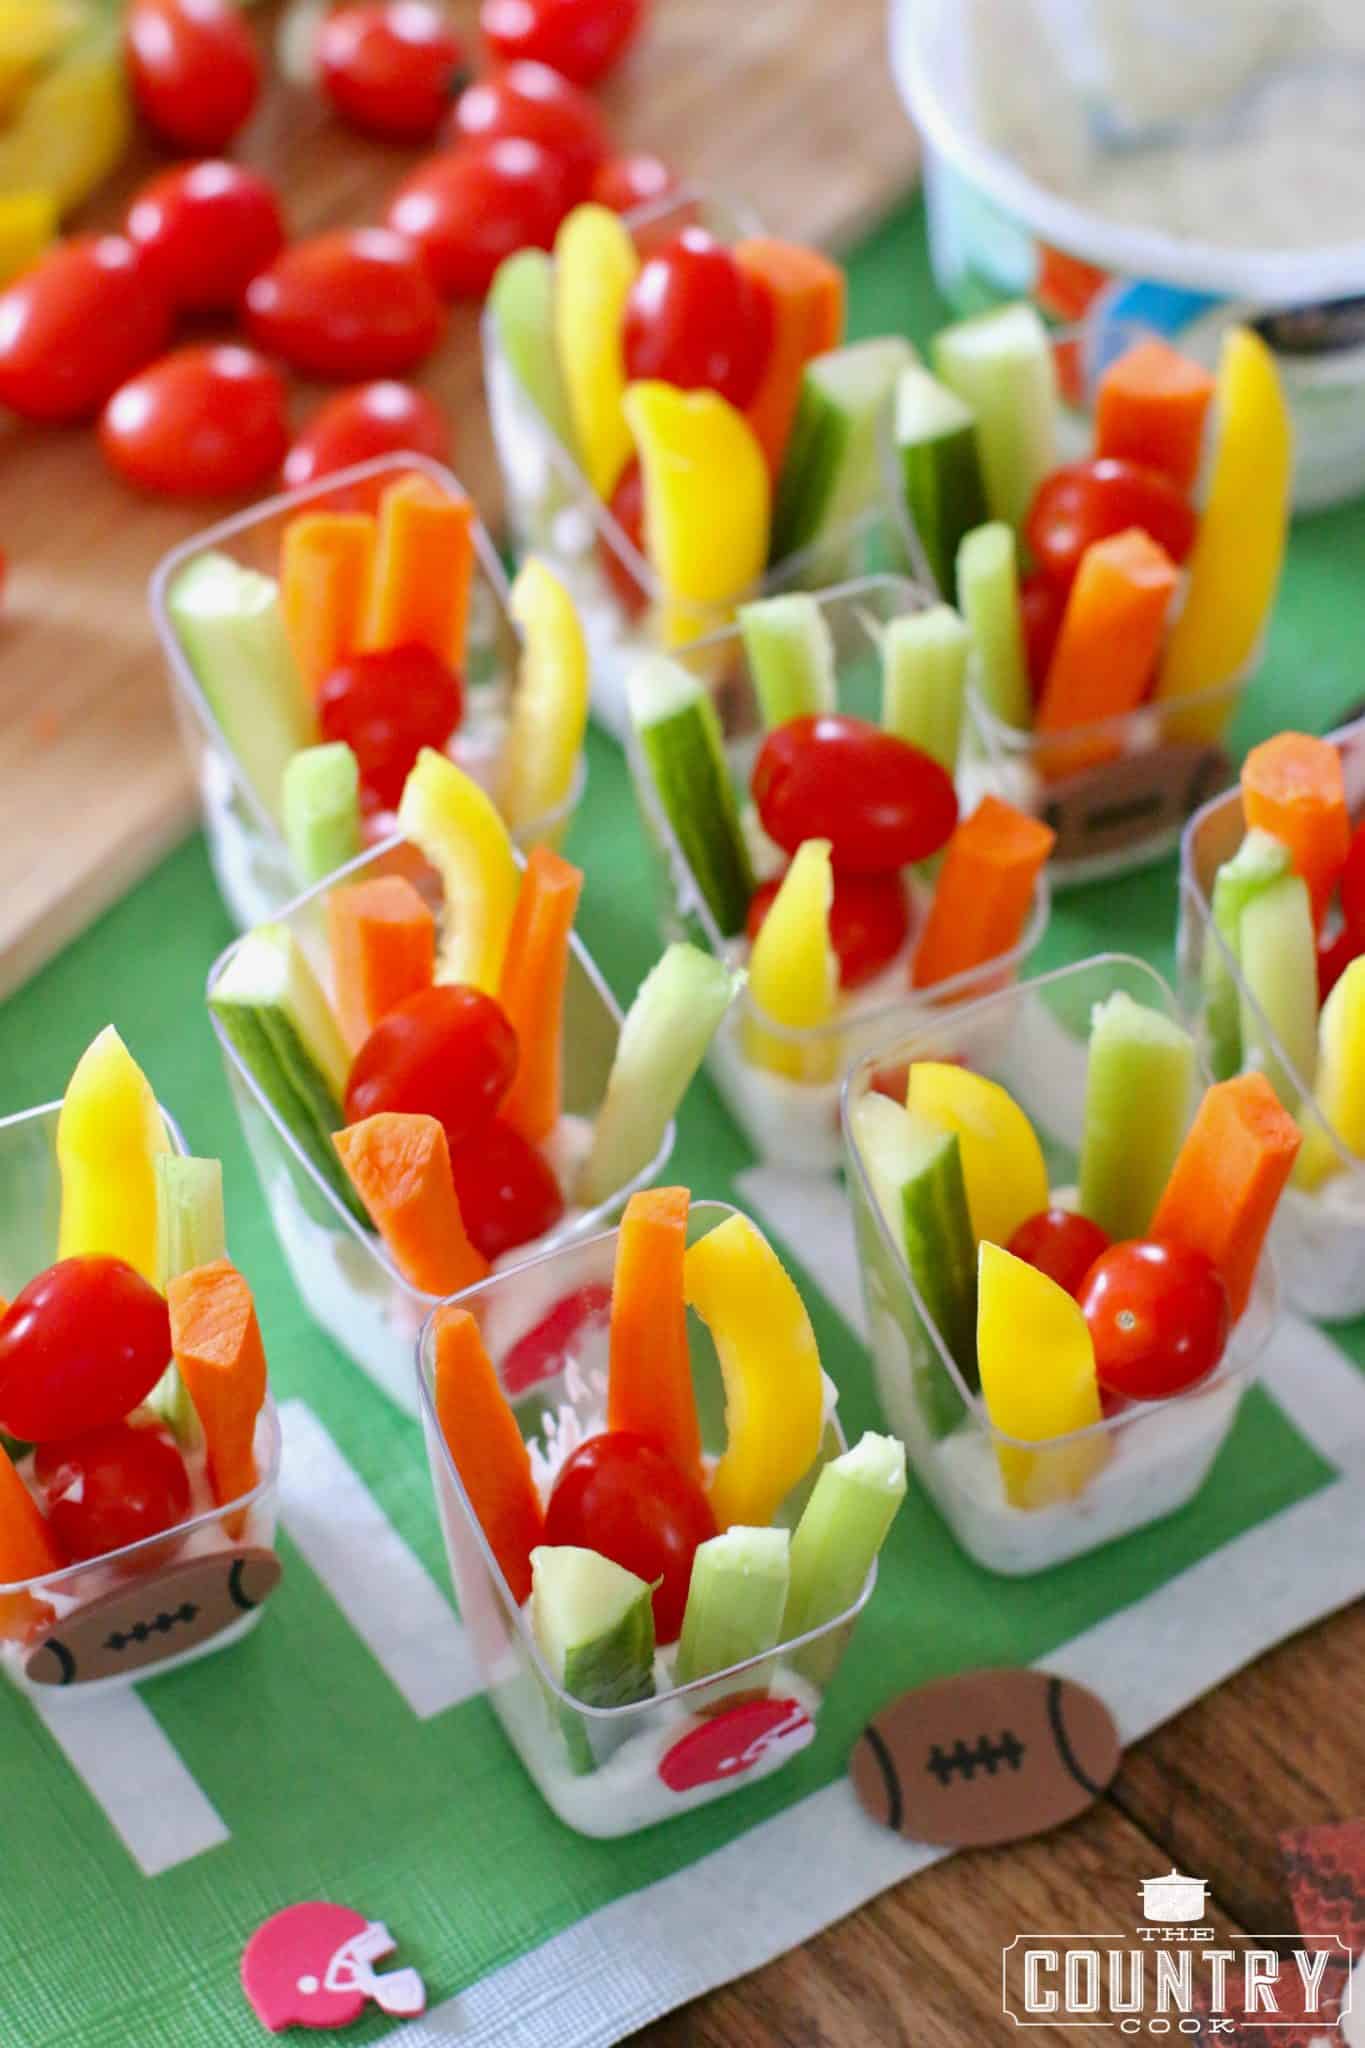 individual veggie dip cups on a football patterned table cloth.